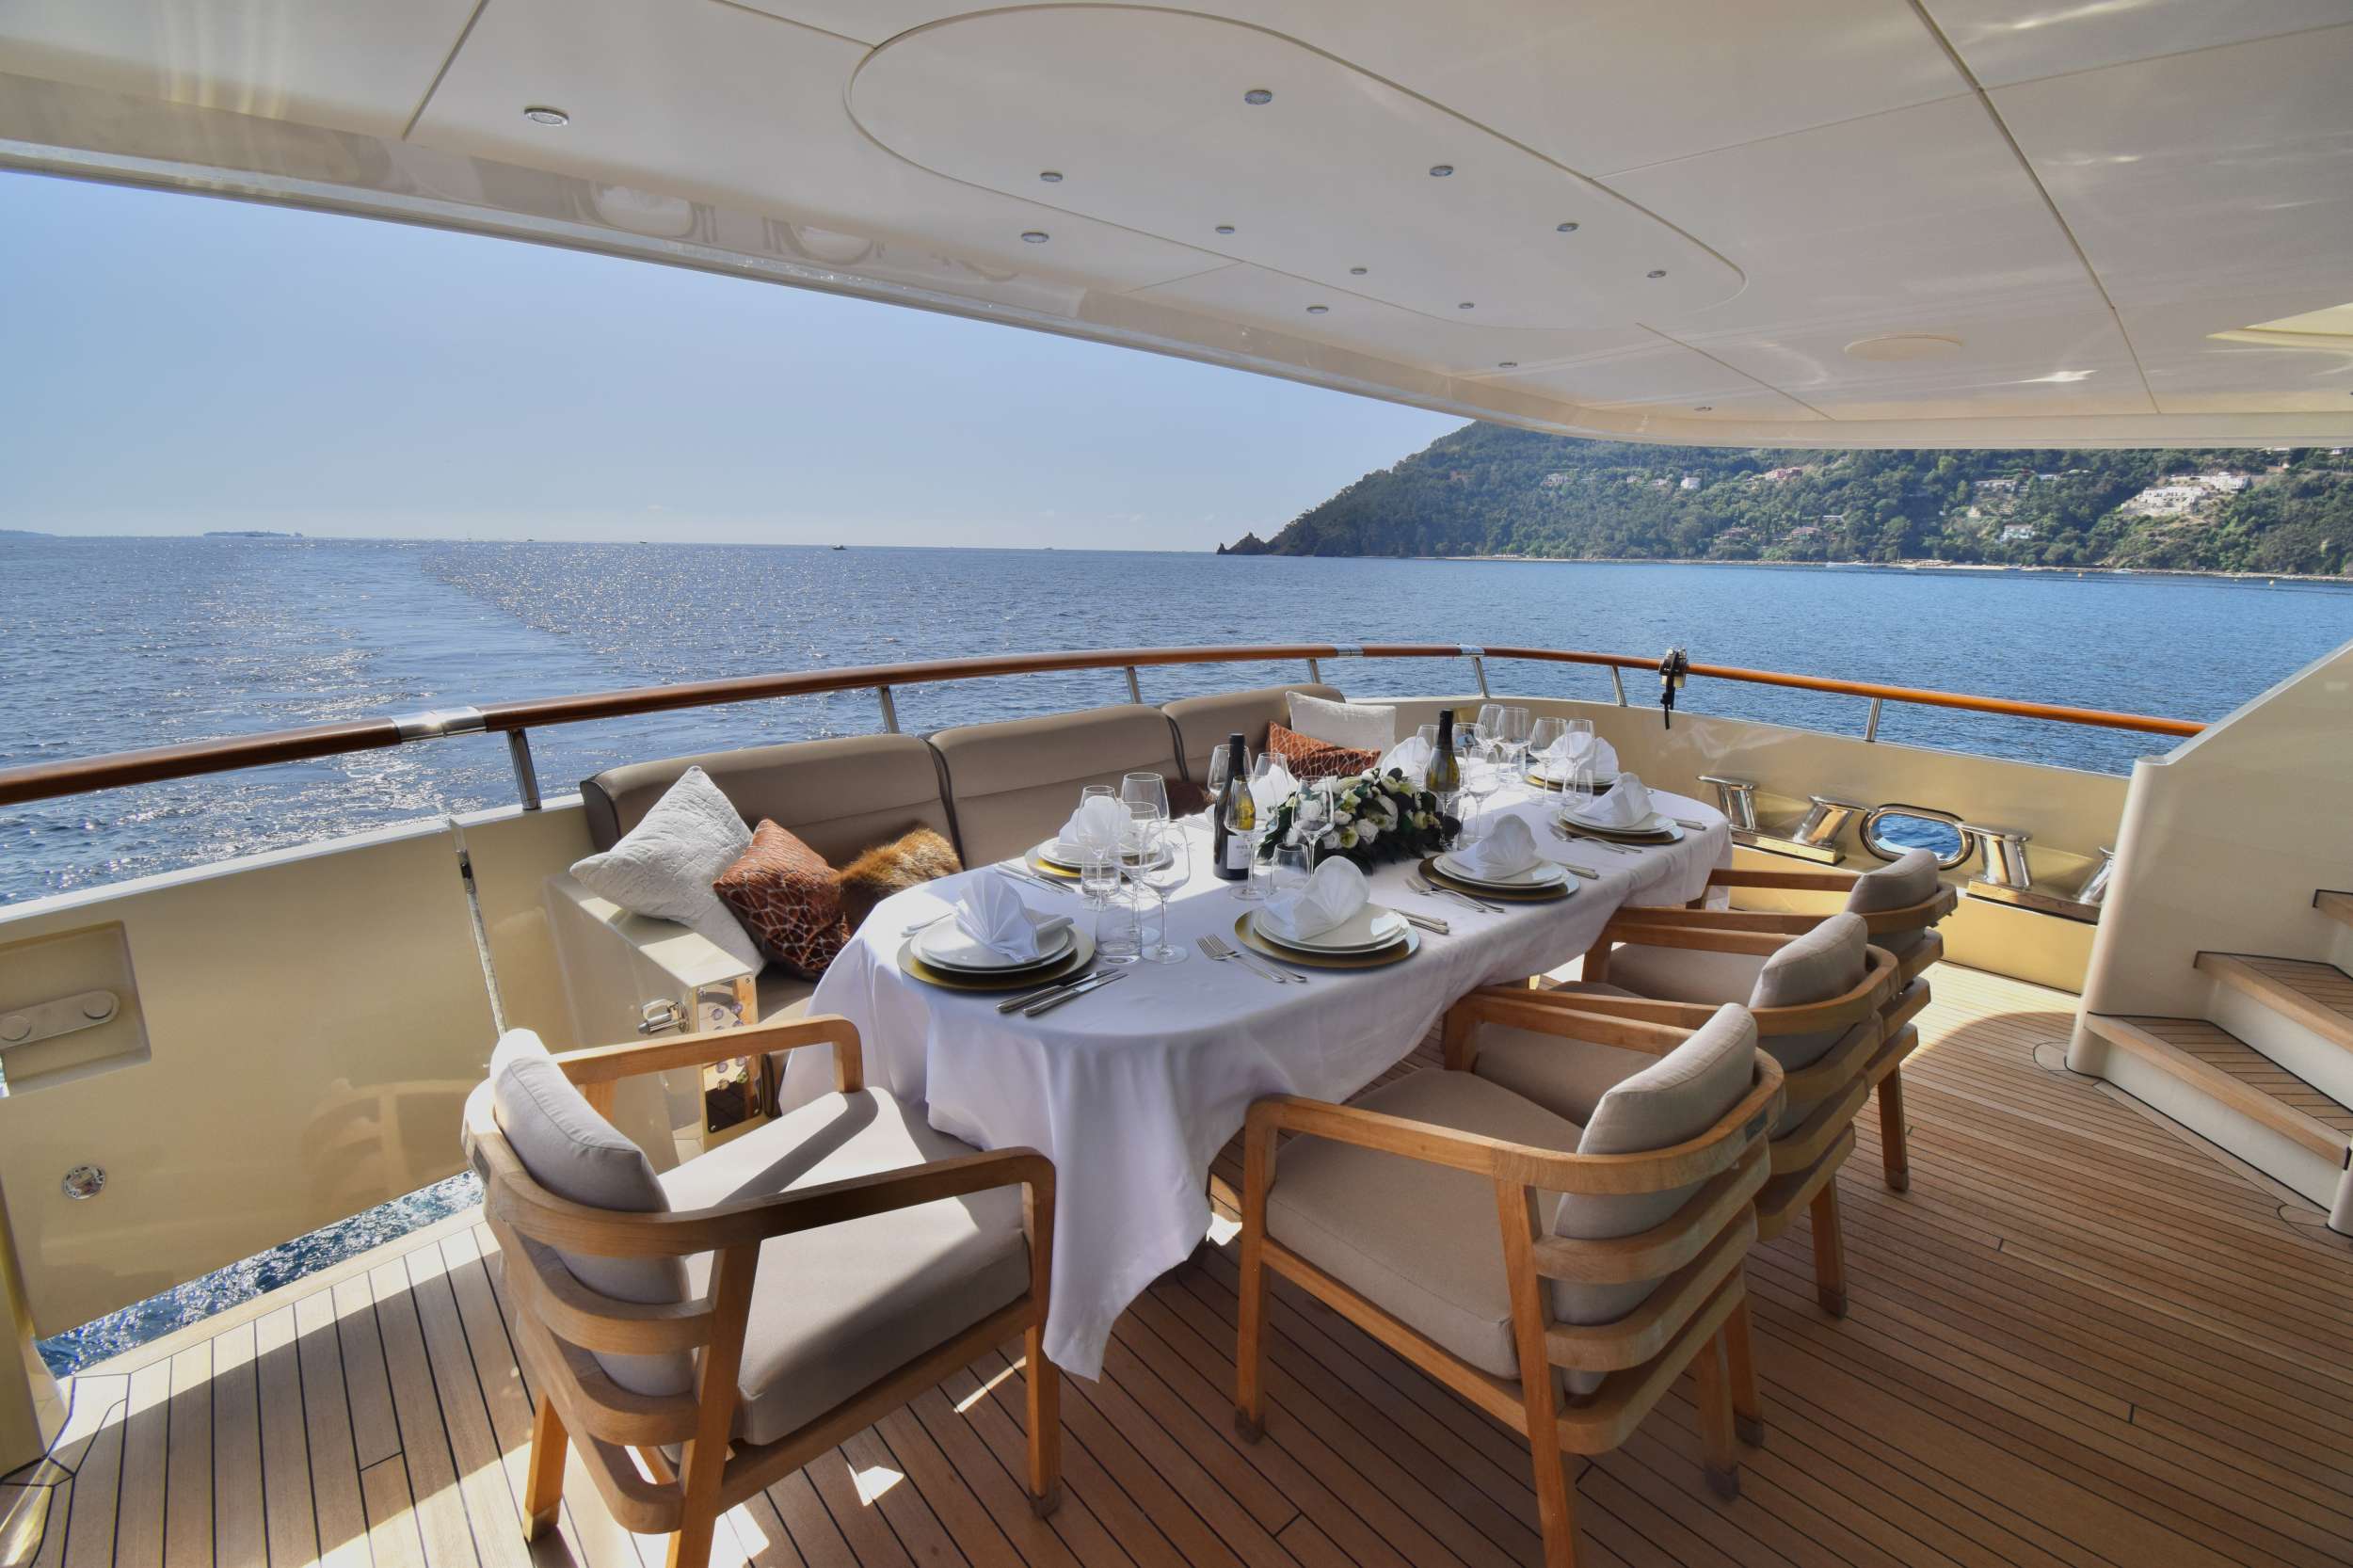 ORIZZONTE - Yacht Charter El Rompido & Boat hire in W. Med -Naples/Sicily, W. Med -Riviera/Cors/Sard., W. Med - Spain/Balearics 3